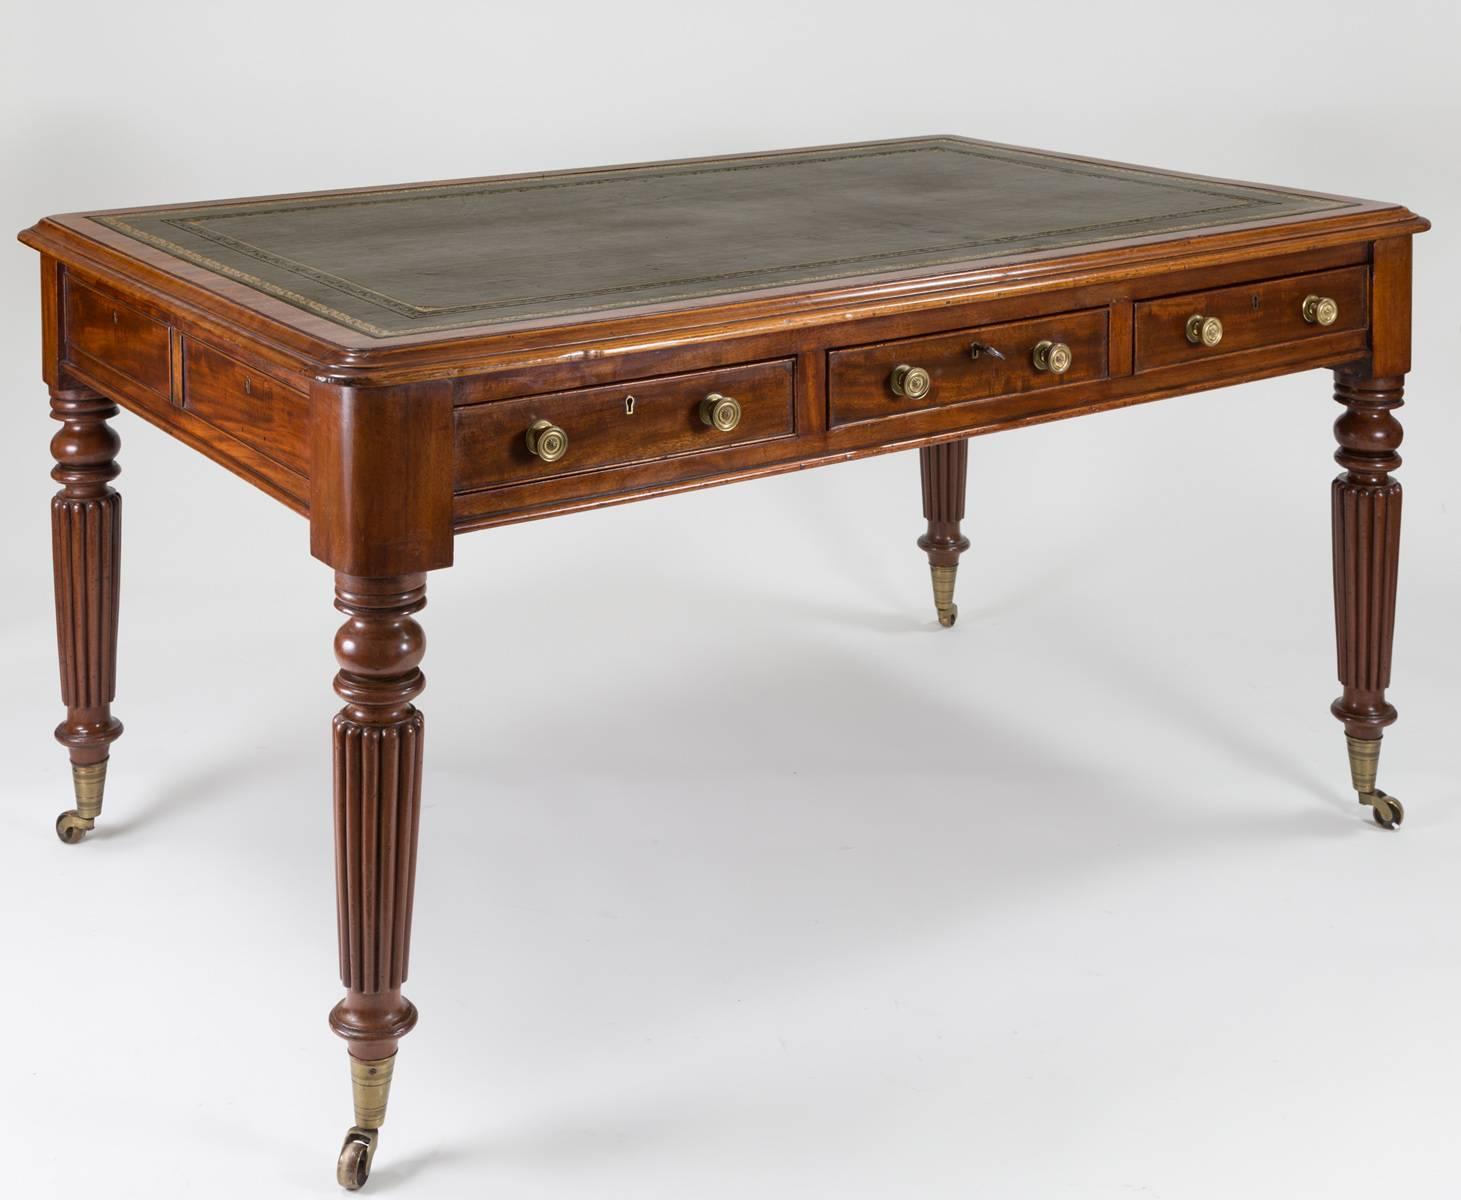 Regency mahogany partners writing table with molded top edge and having six cock beaded drawers with brass knobs, the top covered with antiqued green leather with gilt tooling, supported on reeded and turned legs ending in brass casters.